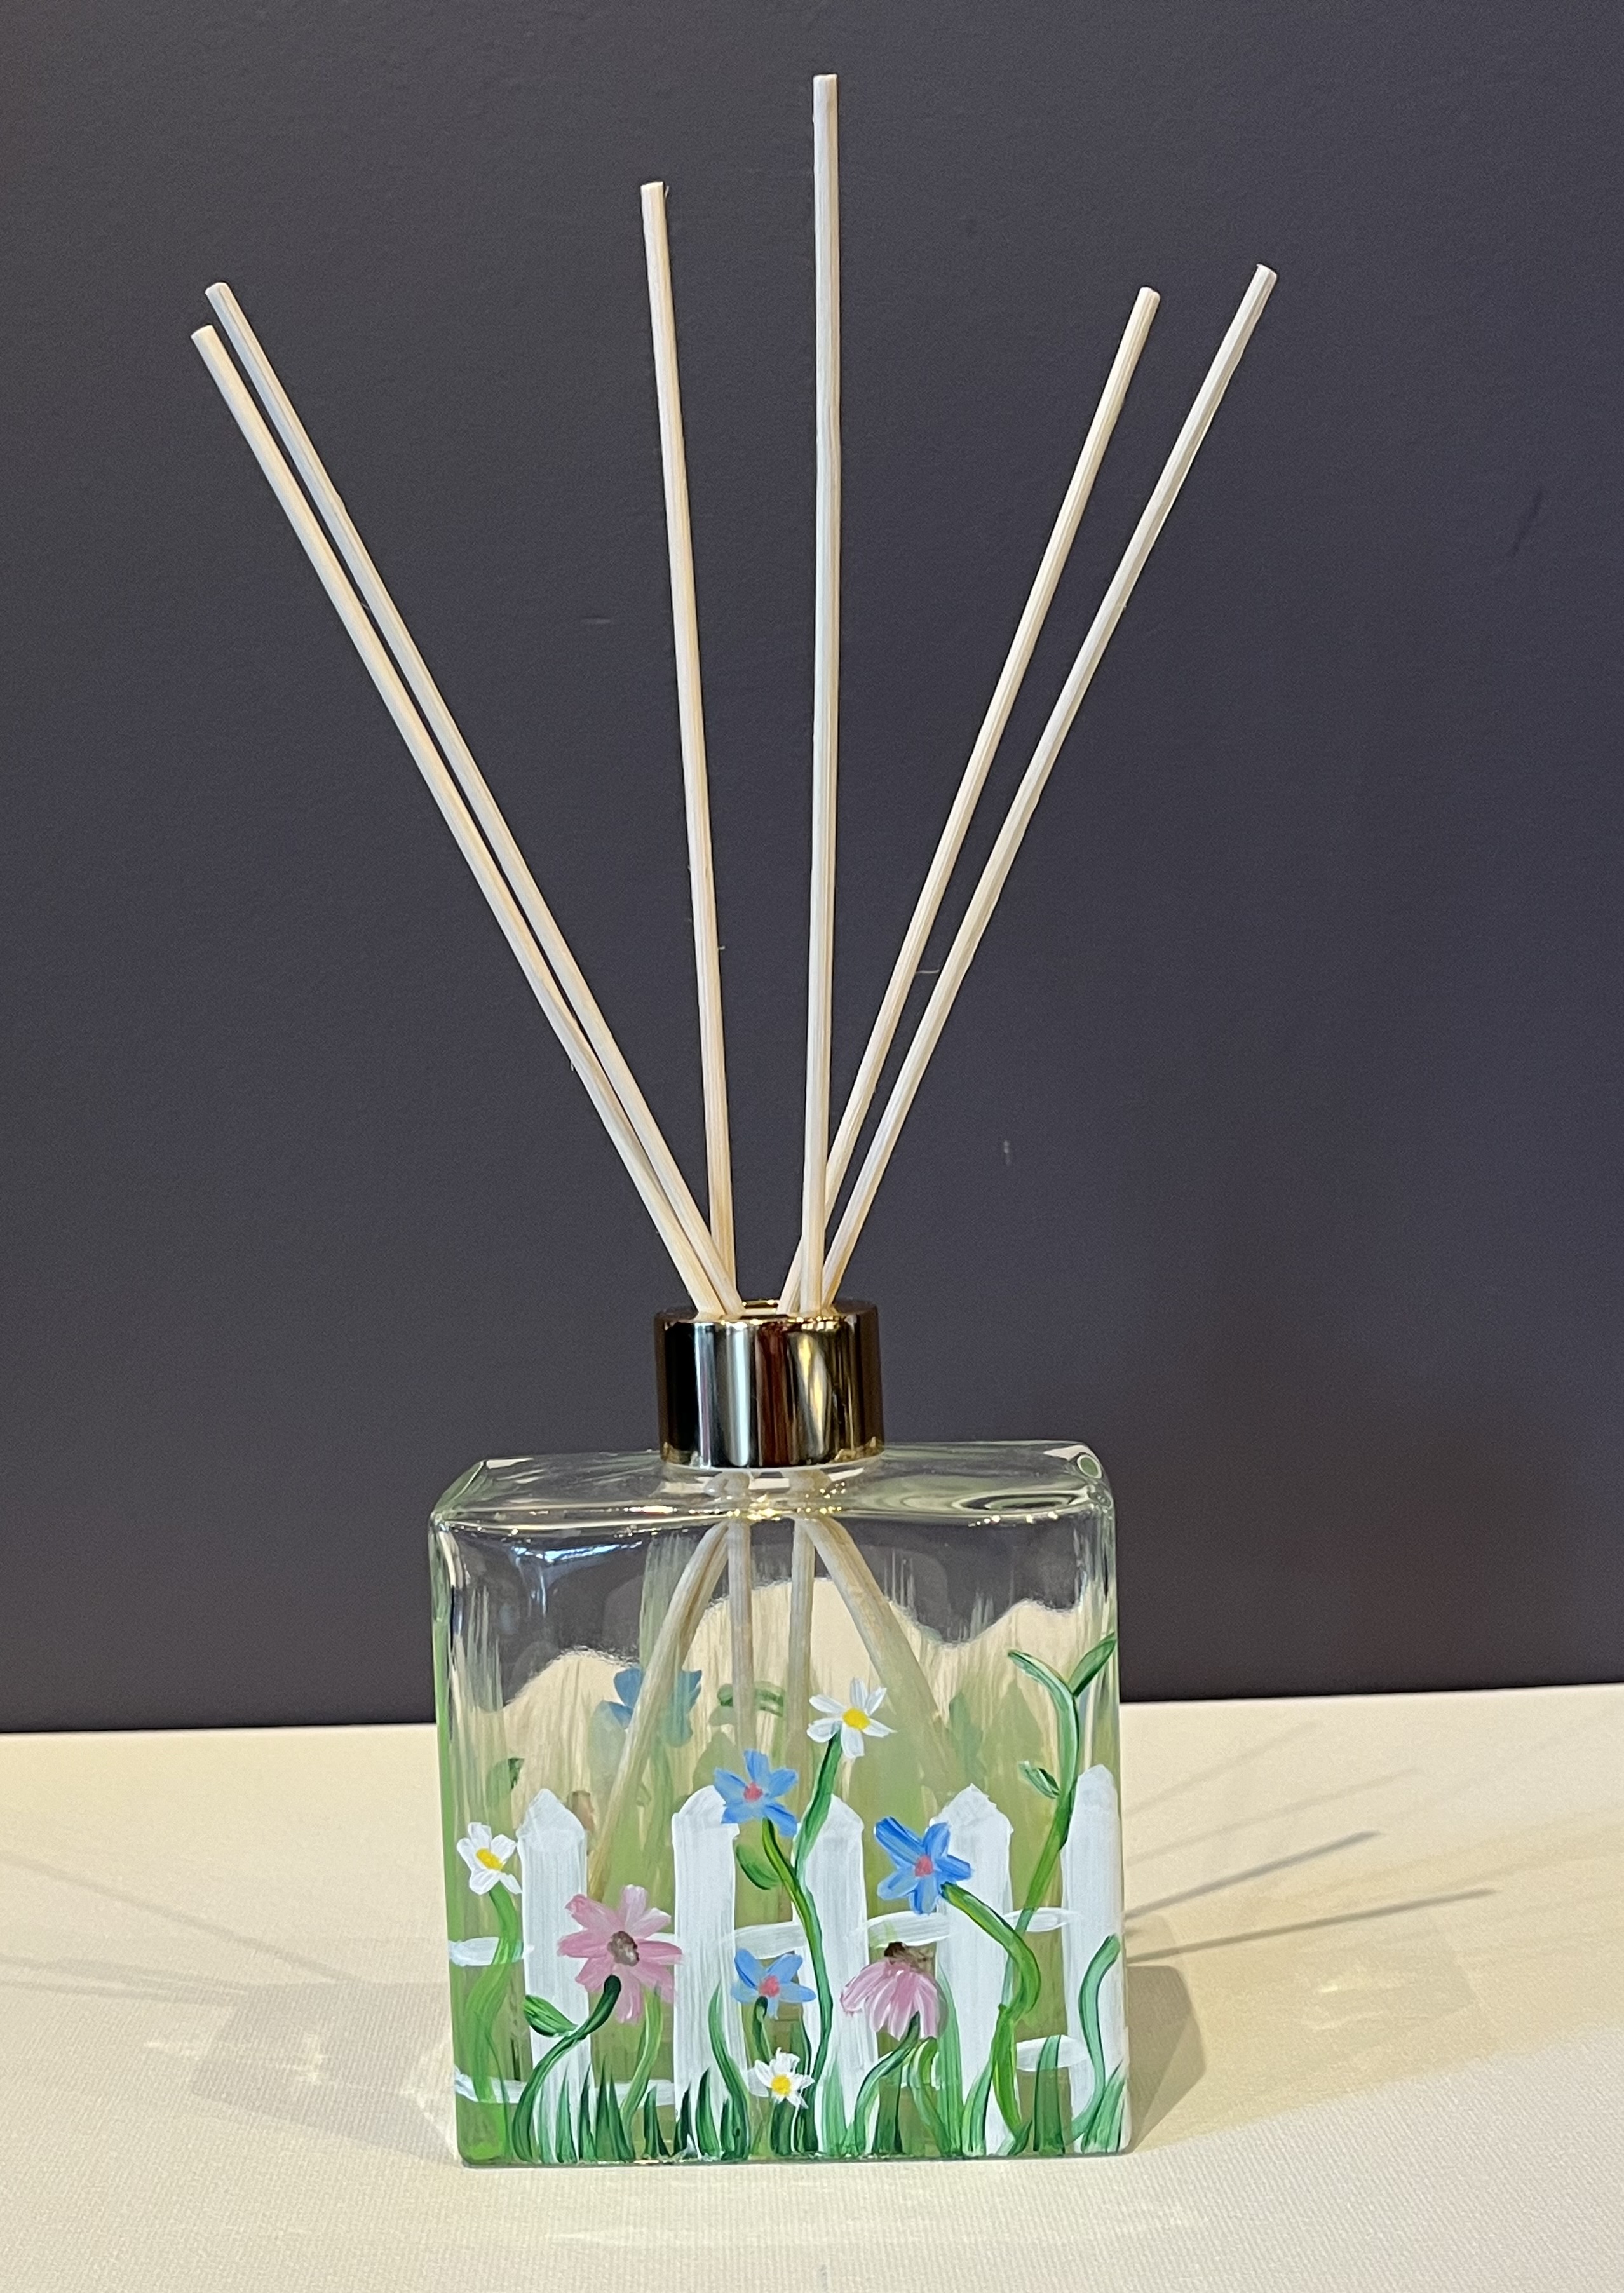 Inluro & Pinot's Palette Reed Diffuser Collaboration Event